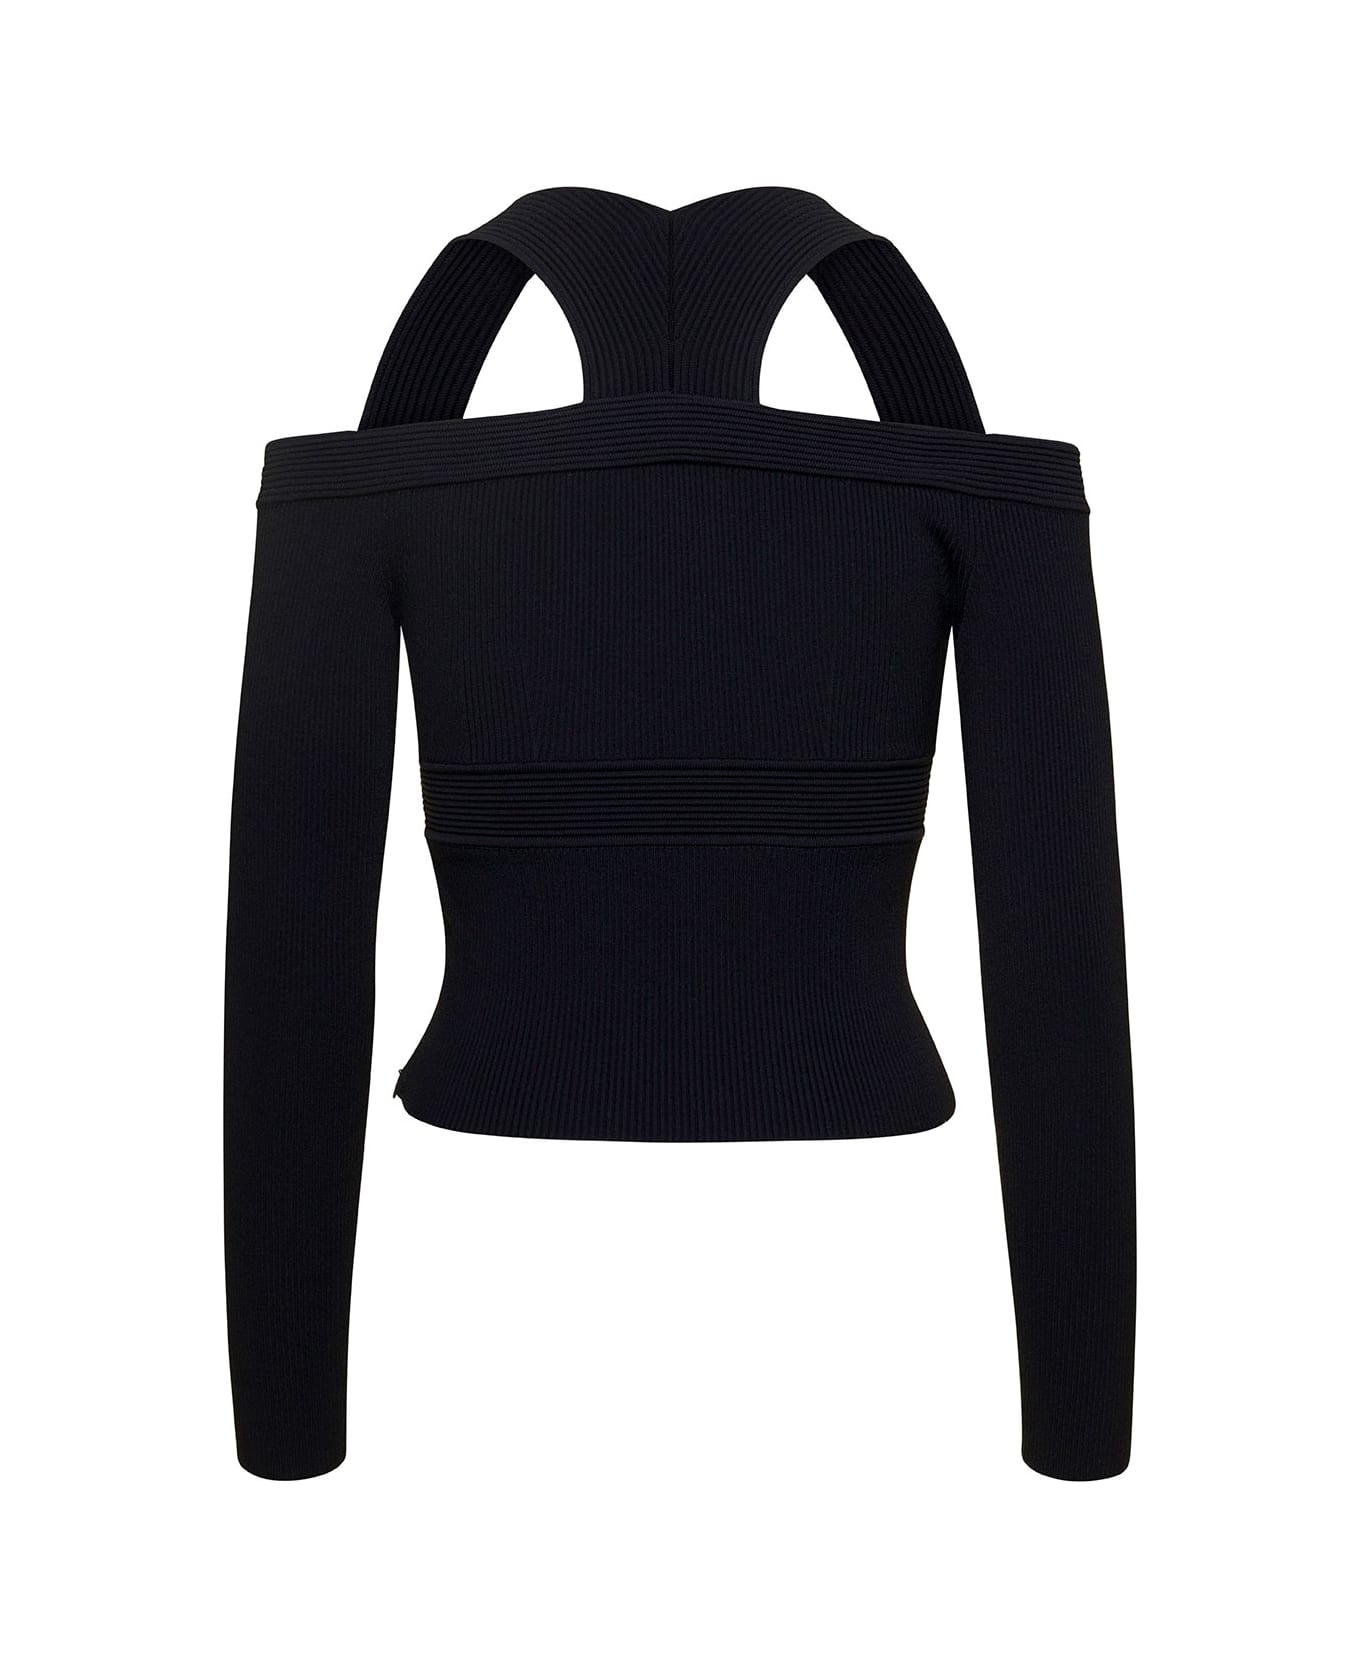 Alexander McQueen Black Cropped Top With Cut-out Details Black In Jersey Stretch Woman - Black トップス